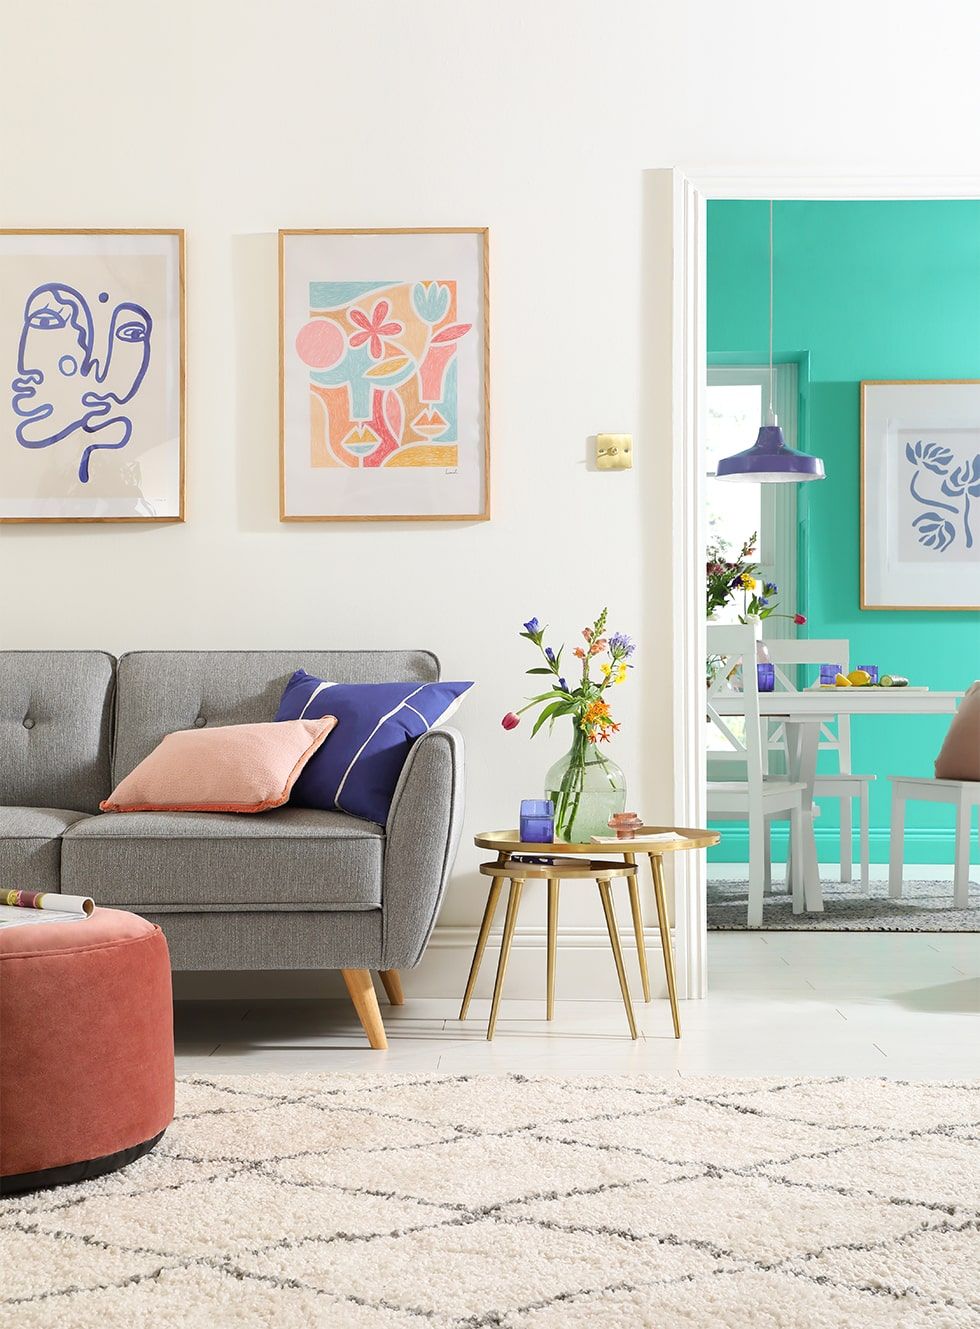 A Scandi inspired living room with a stylish grey sofa, and cushions and artwork in Pantone's Colour of the Year 2022 Very Peri.